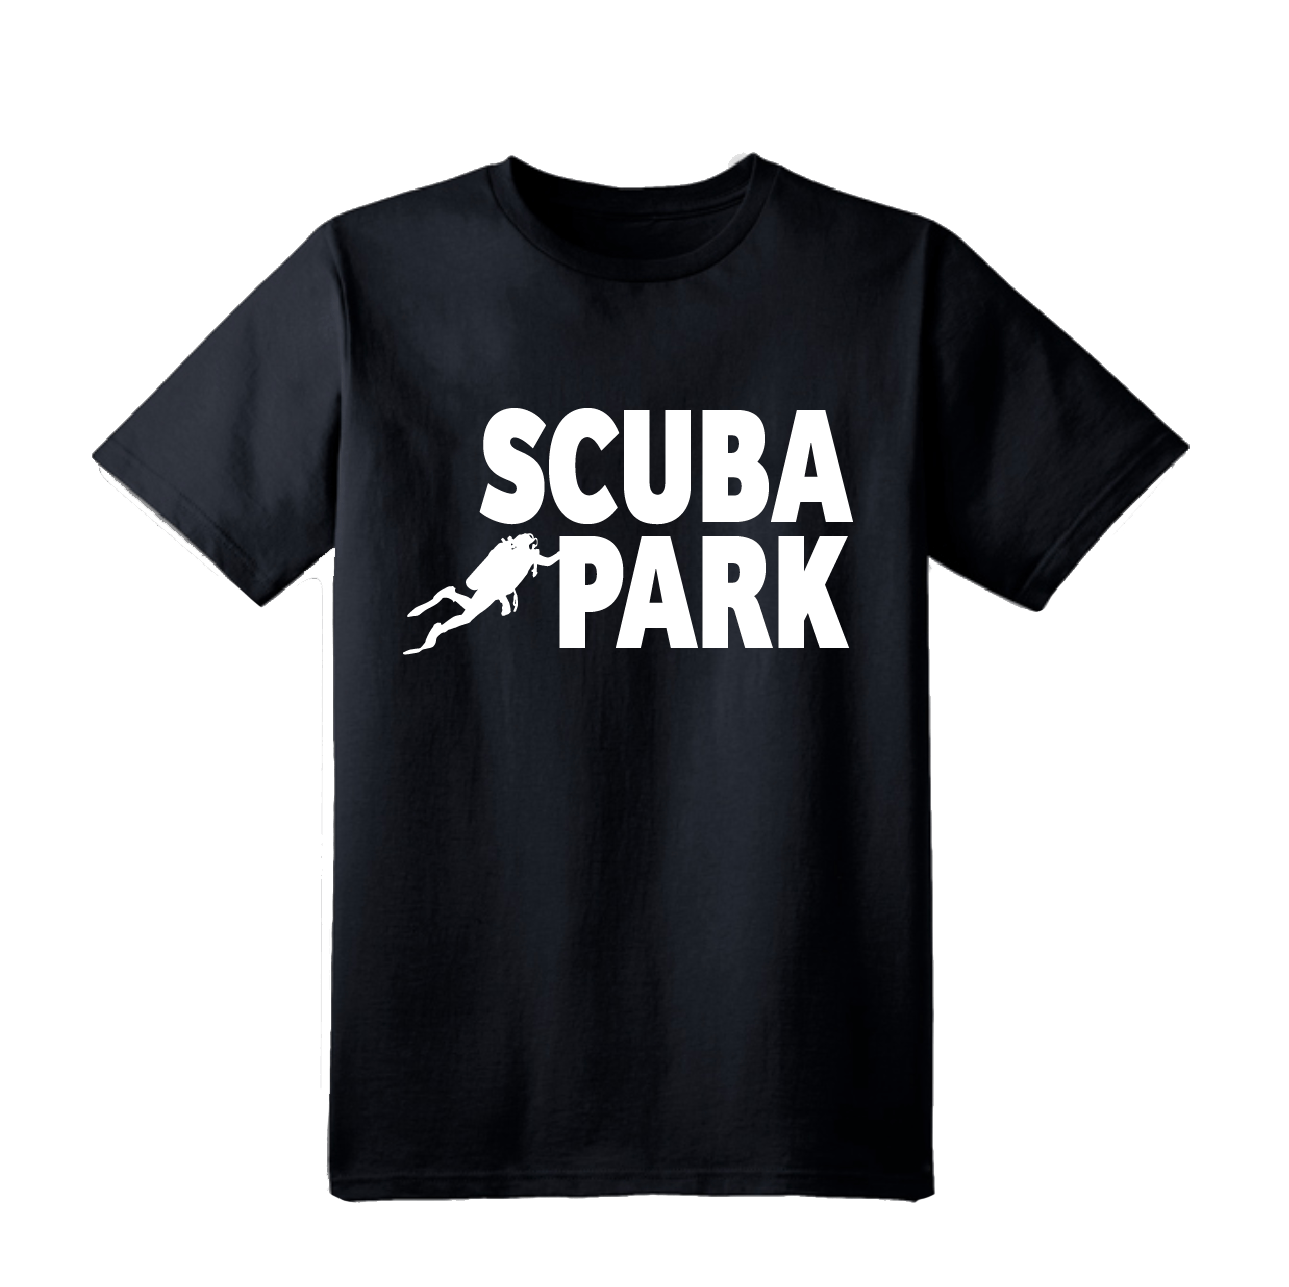 A black t-shirt with the words scuba park on it